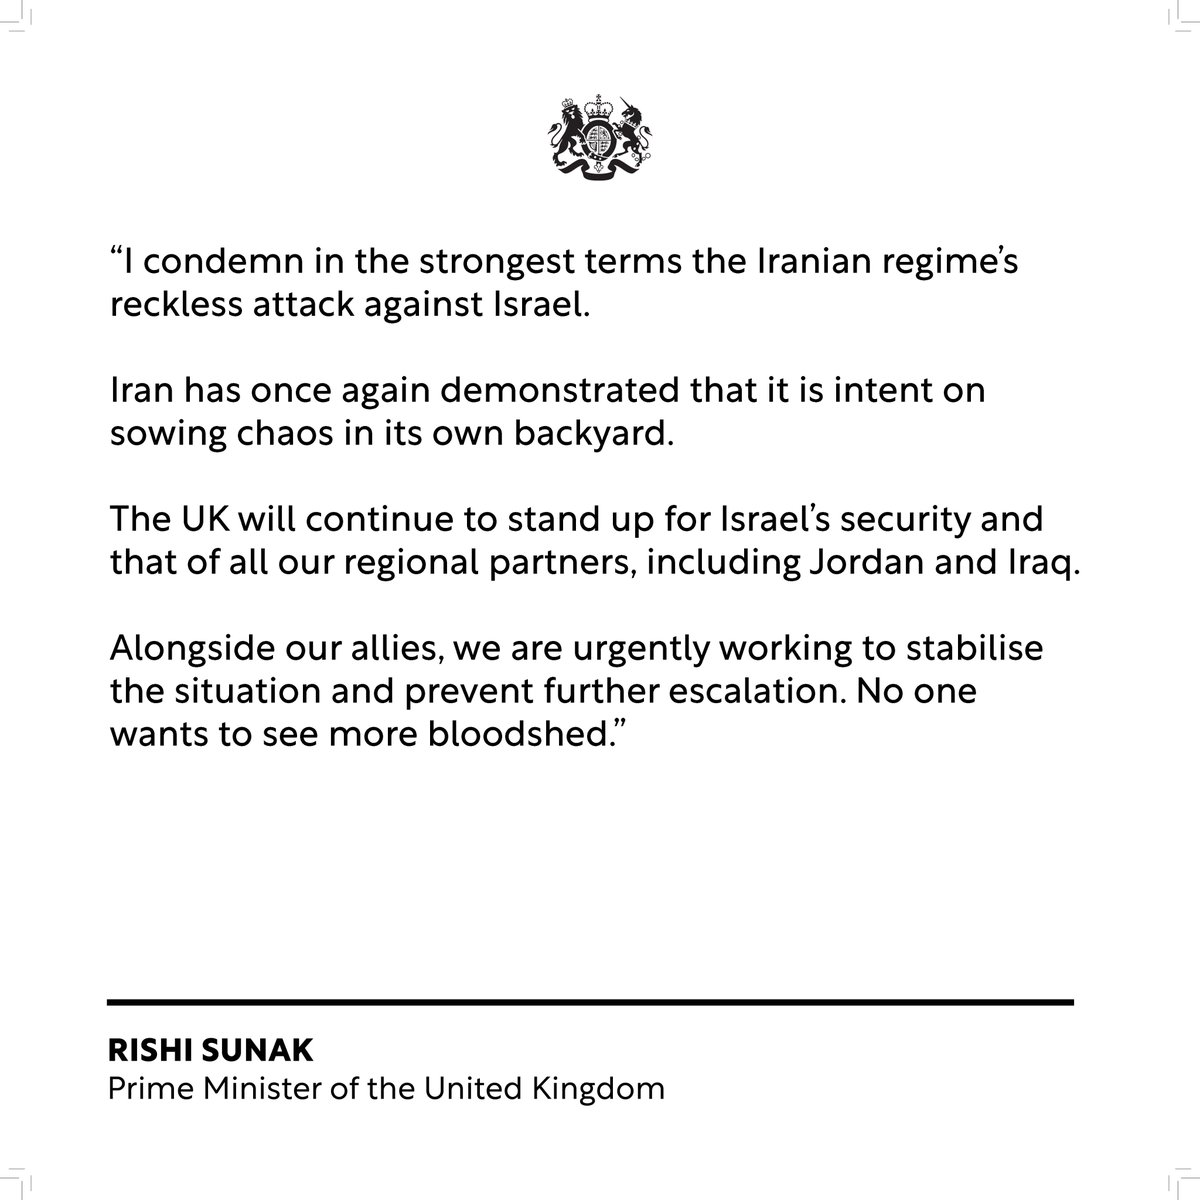 BREAKING: British Prime Minister Rishi Sunak has condemned Iran’s “reckless attack” on Israel, saying the UK “will continue to stand up for Israel’s security and that of all our regional partners”. Adding 'No one wants to see more bloodshed'